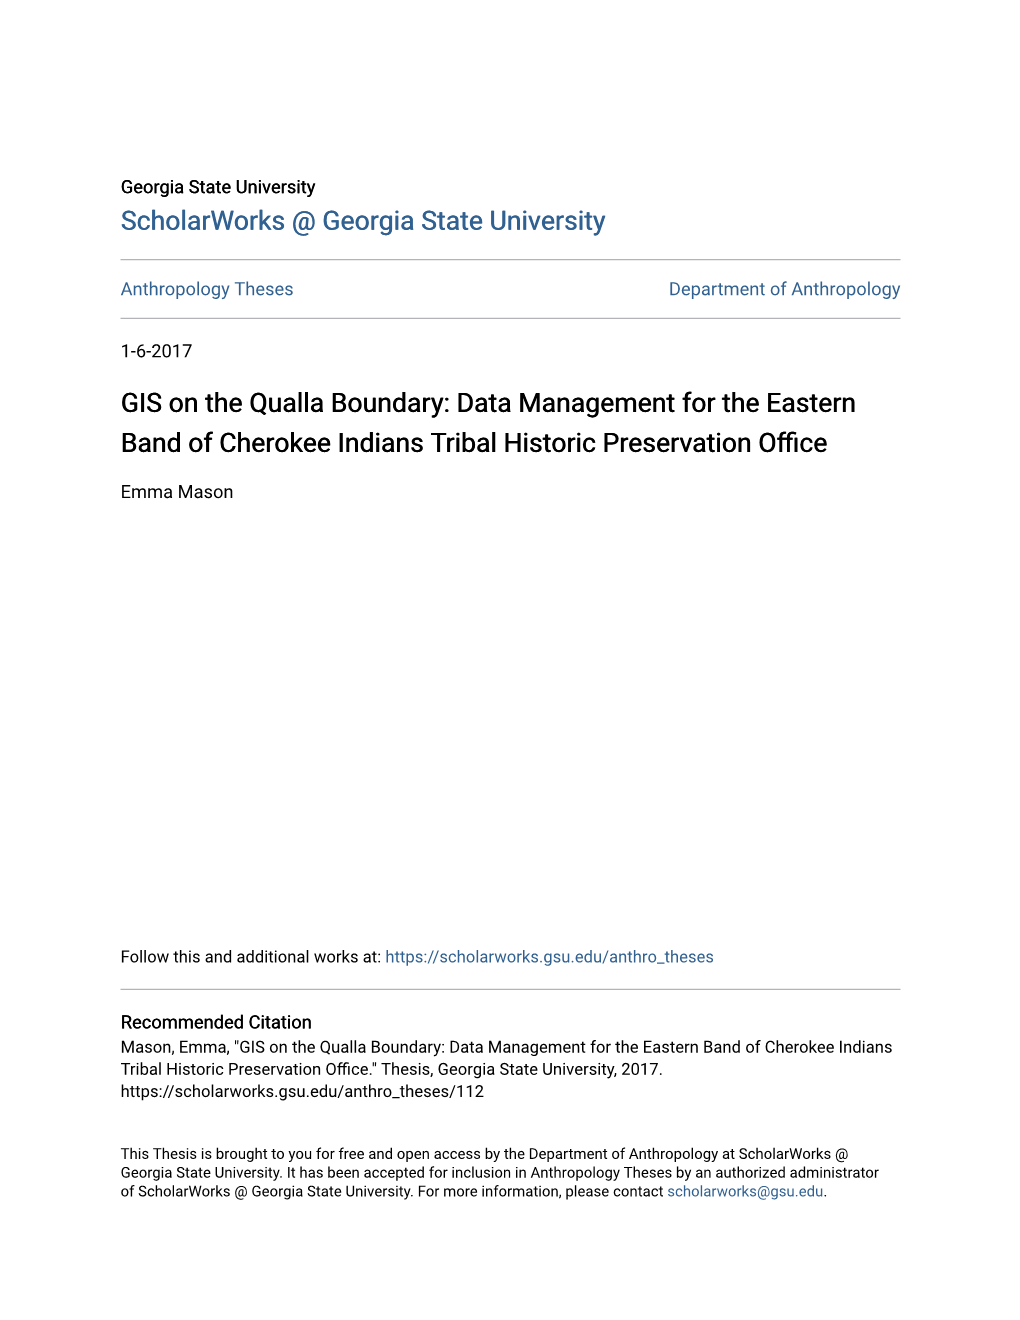 GIS on the Qualla Boundary: Data Management for the Eastern Band of Cherokee Indians Tribal Historic Preservation Office